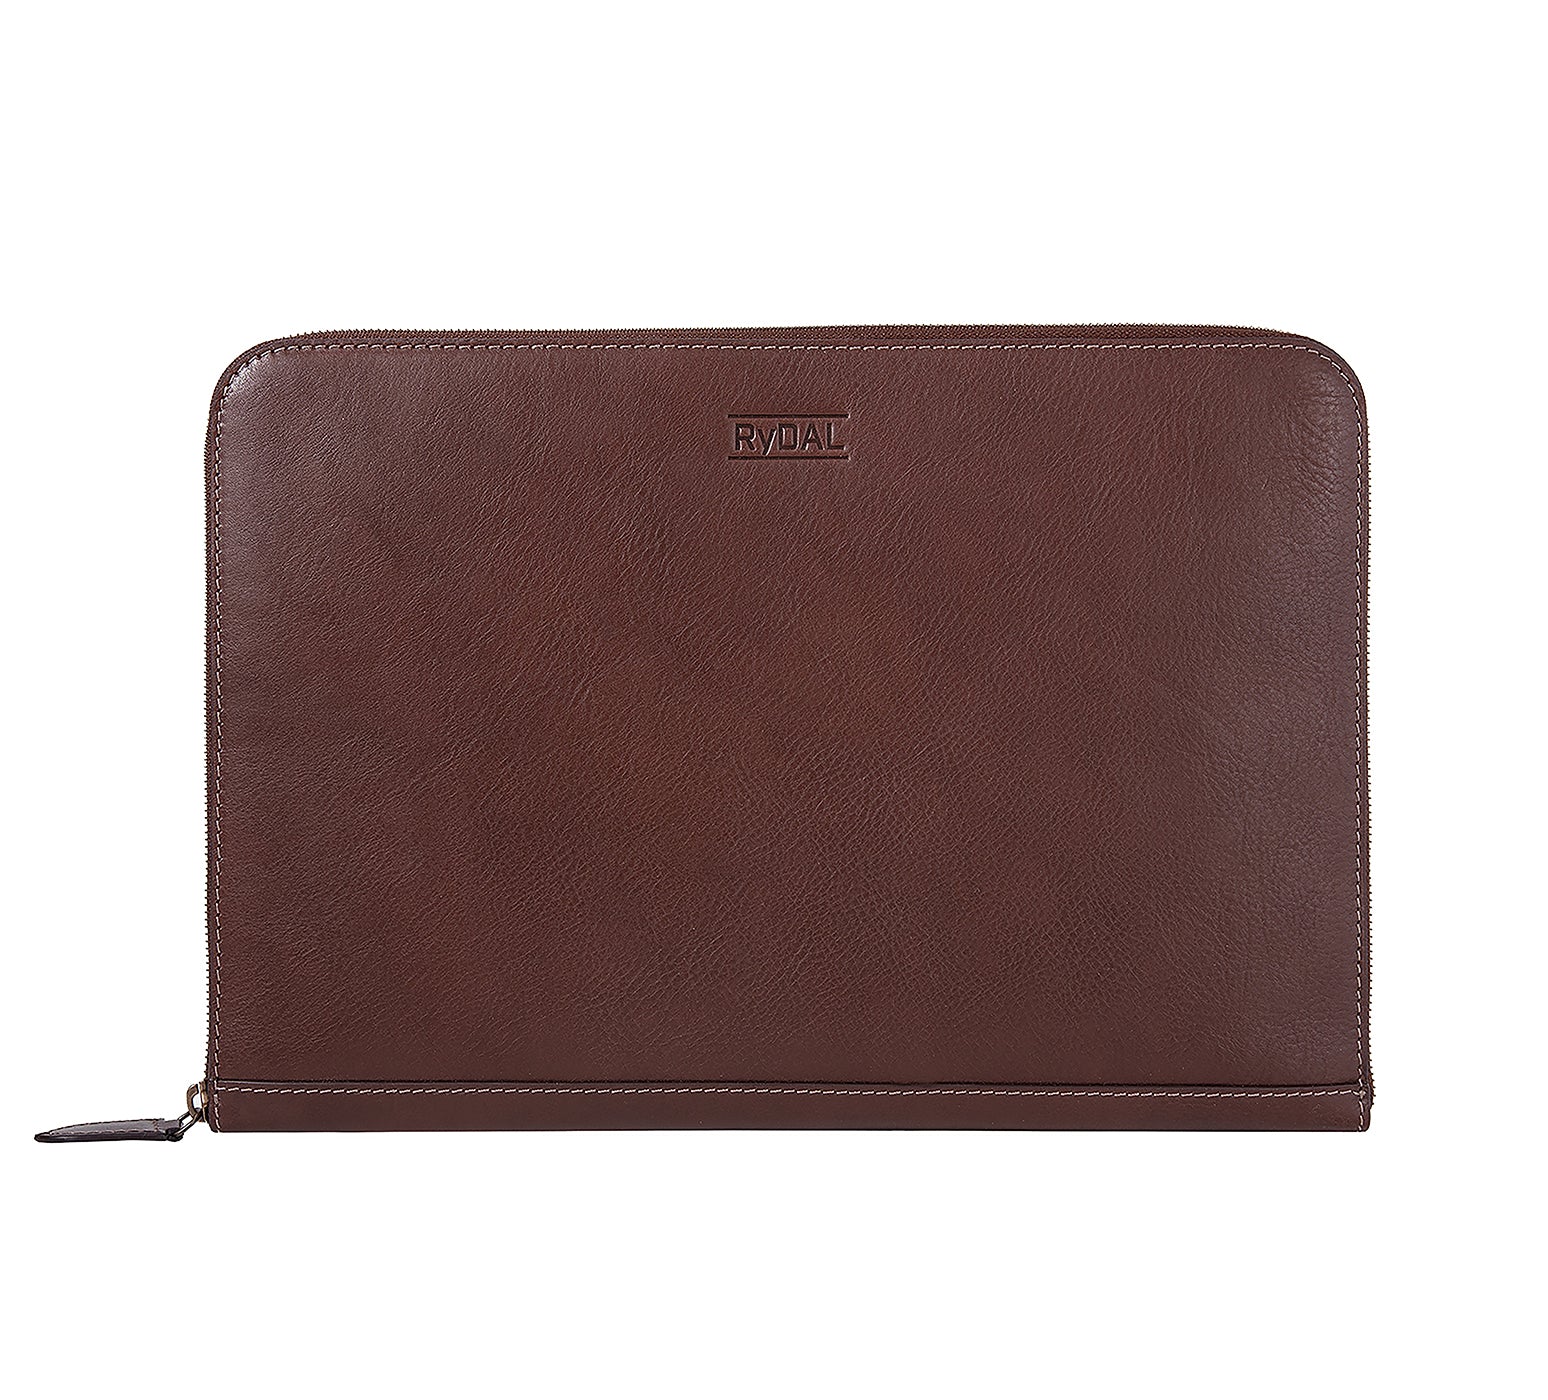 Albany Leather Document Holder from Rydal in 'Dark Brown'.